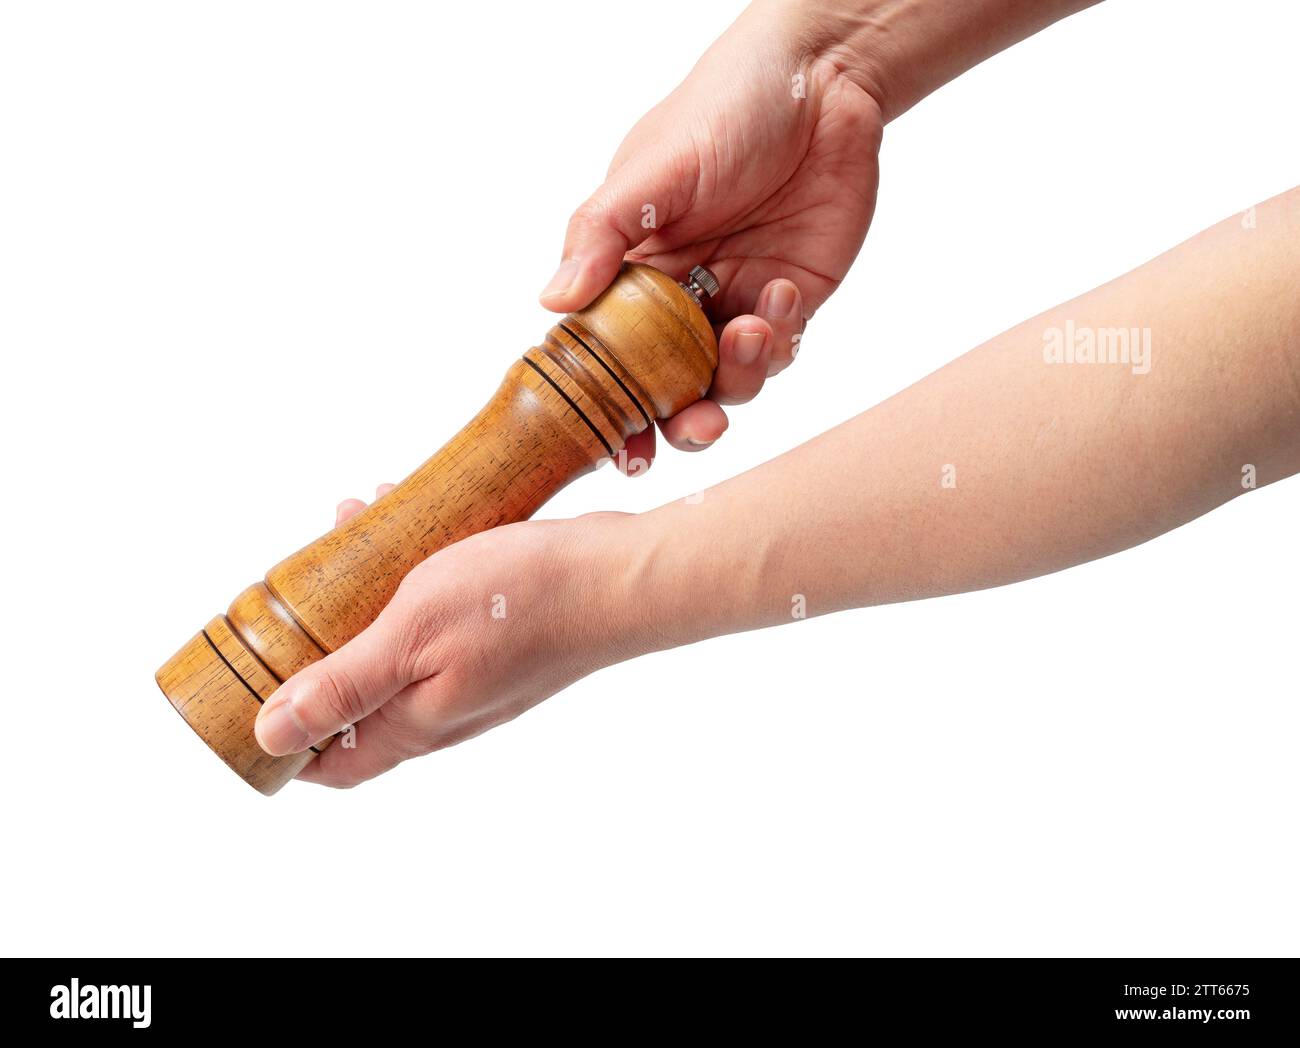 Wooden pepper mill in men's hand isolated on white background. Stock Photo